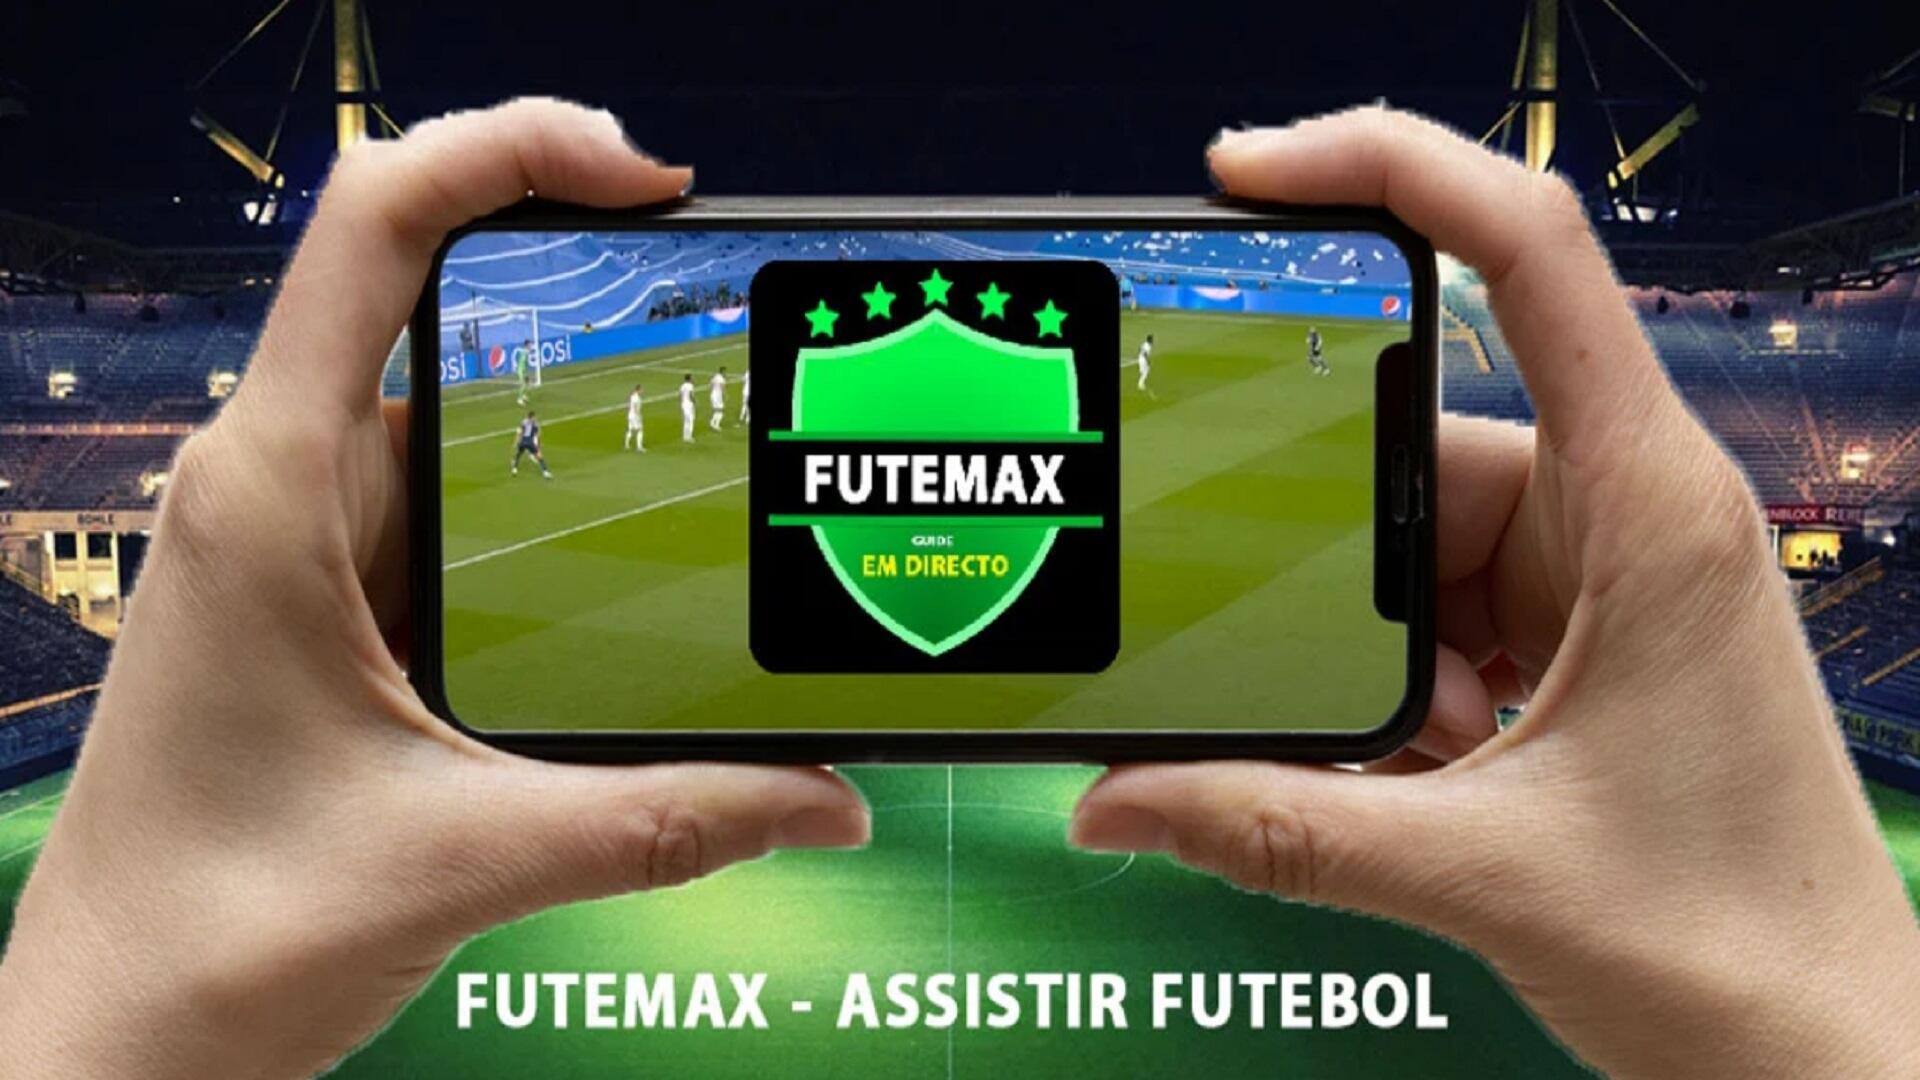 How to download Futemax APK/IOS latest version DOGAS.INFO